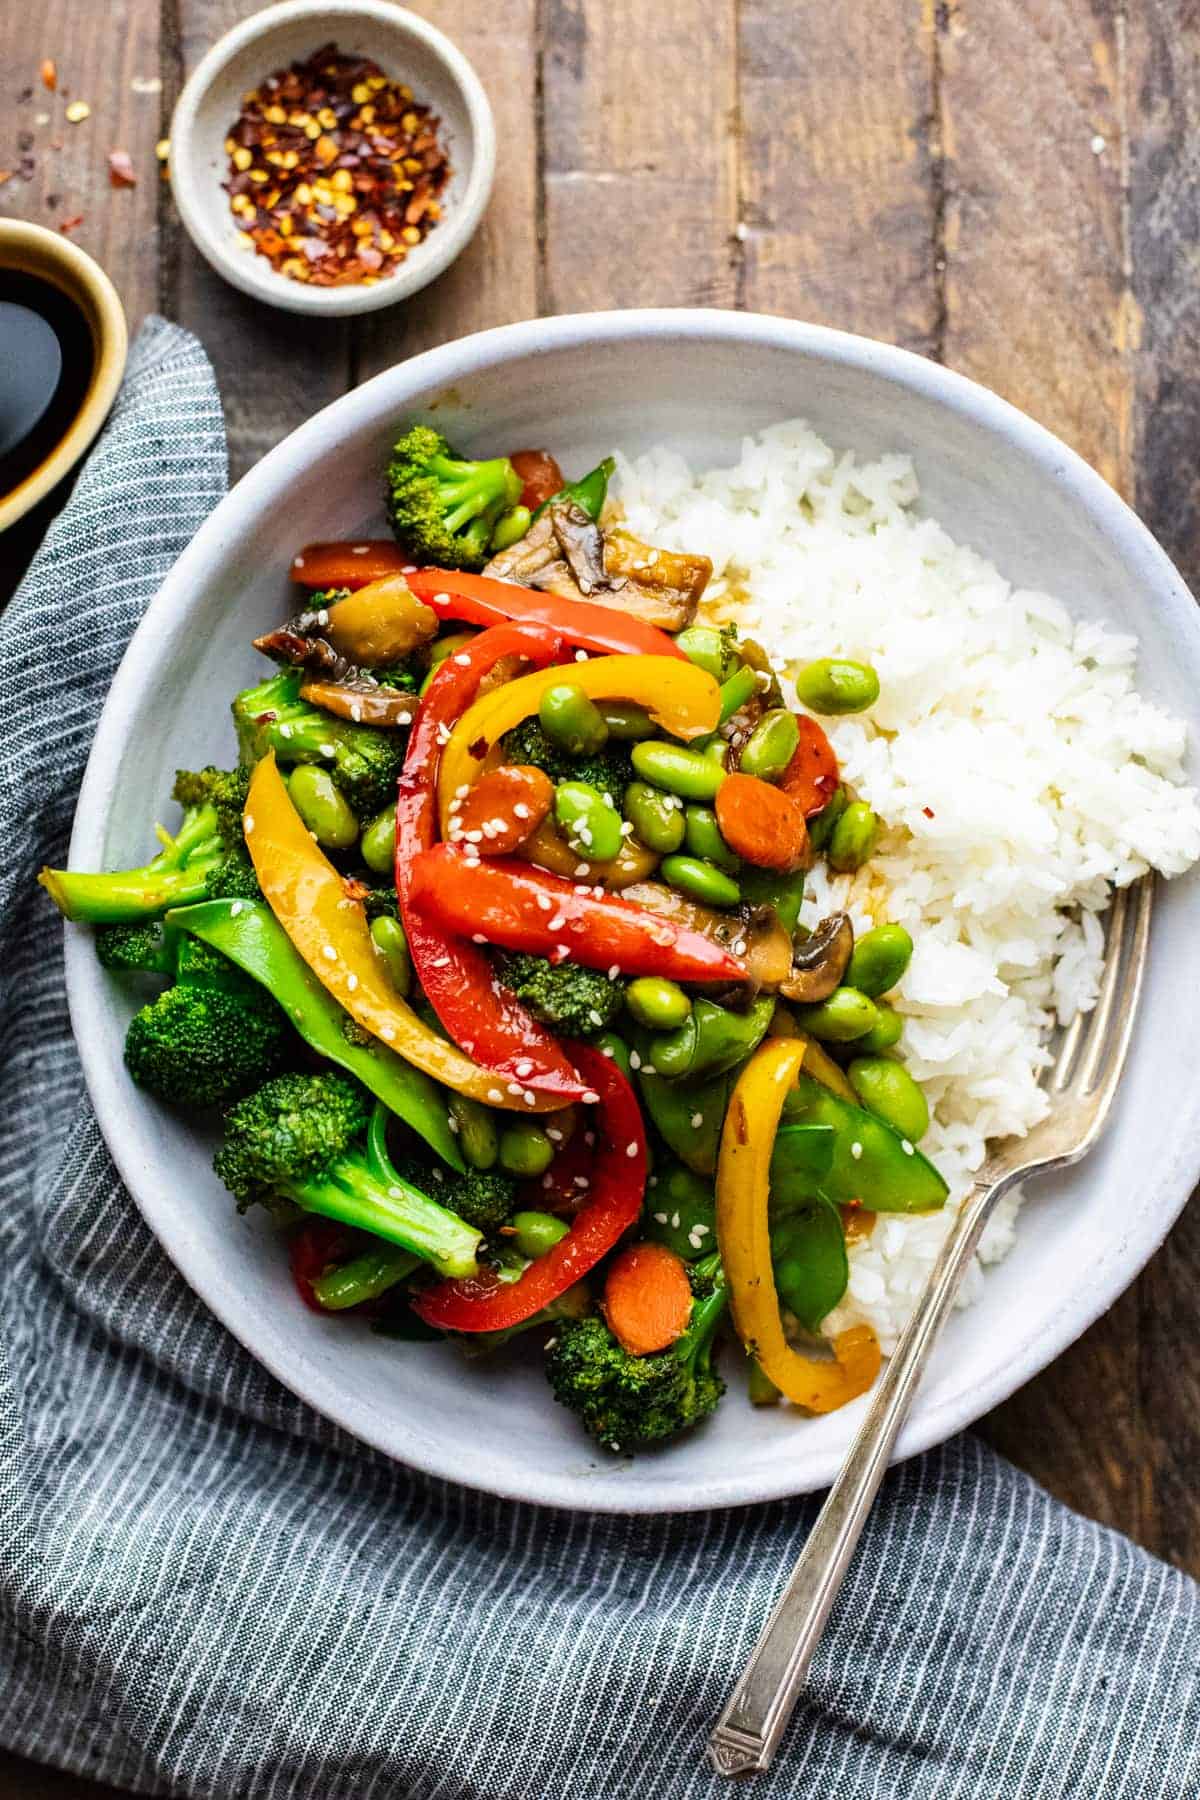 A colourful plate of veg and rice.